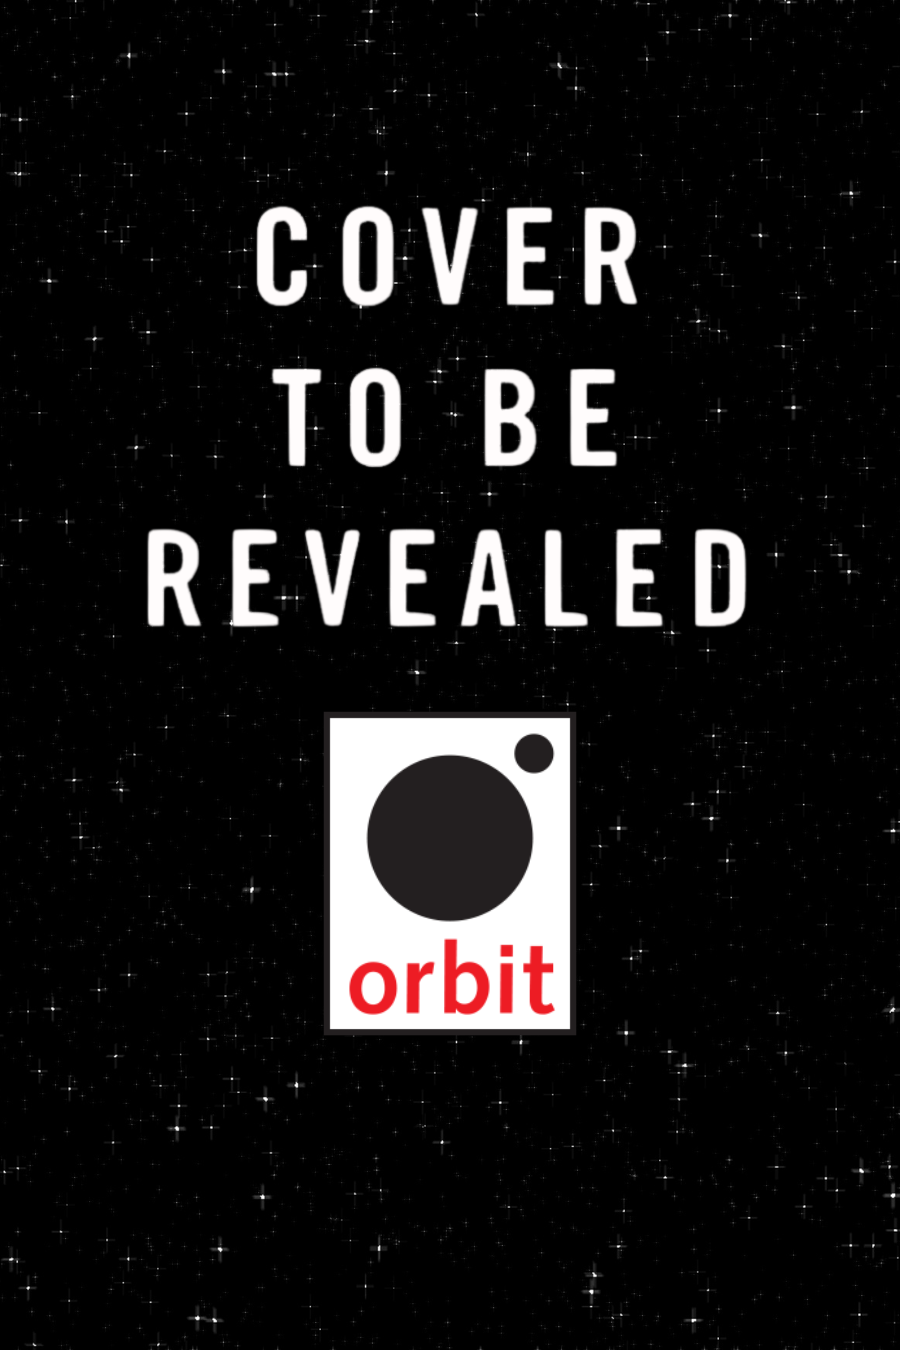 Cover to be revealed